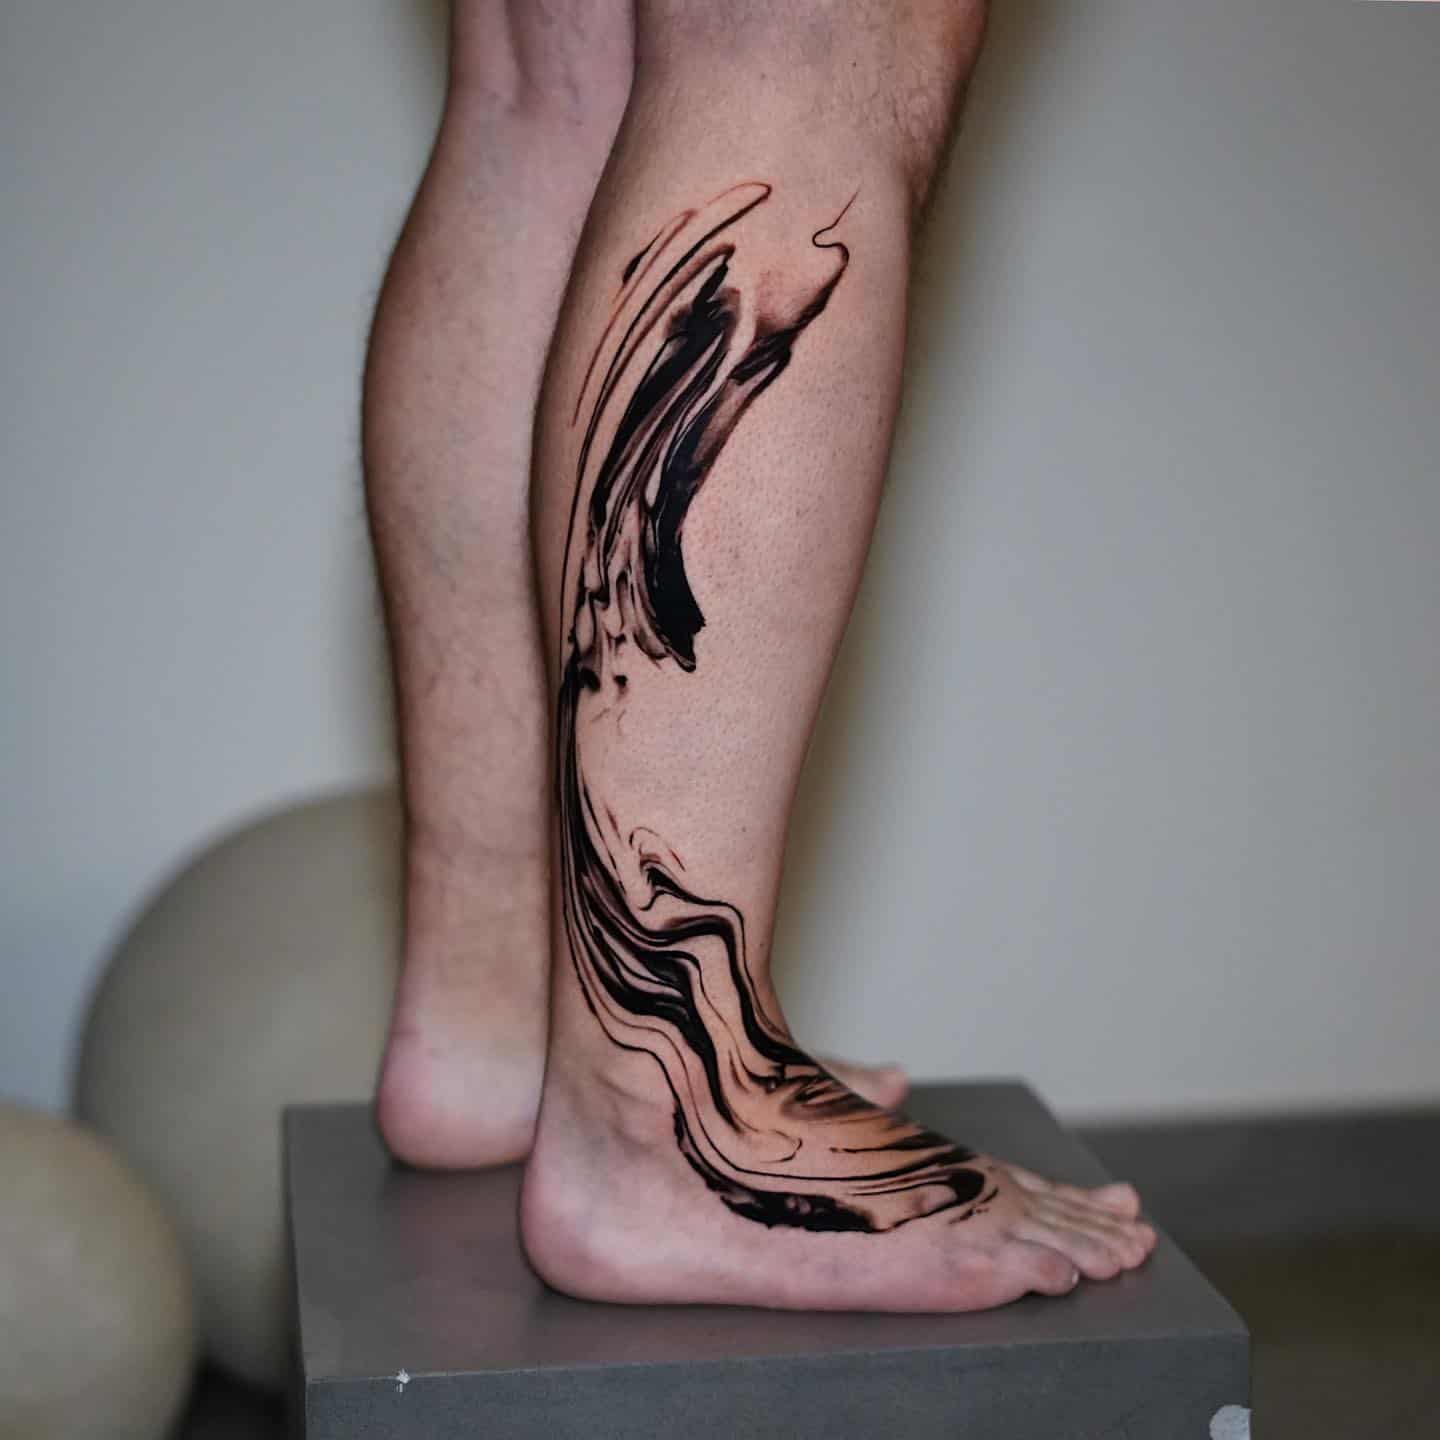 Amazing aabstract tattoo design by jaer tattoo